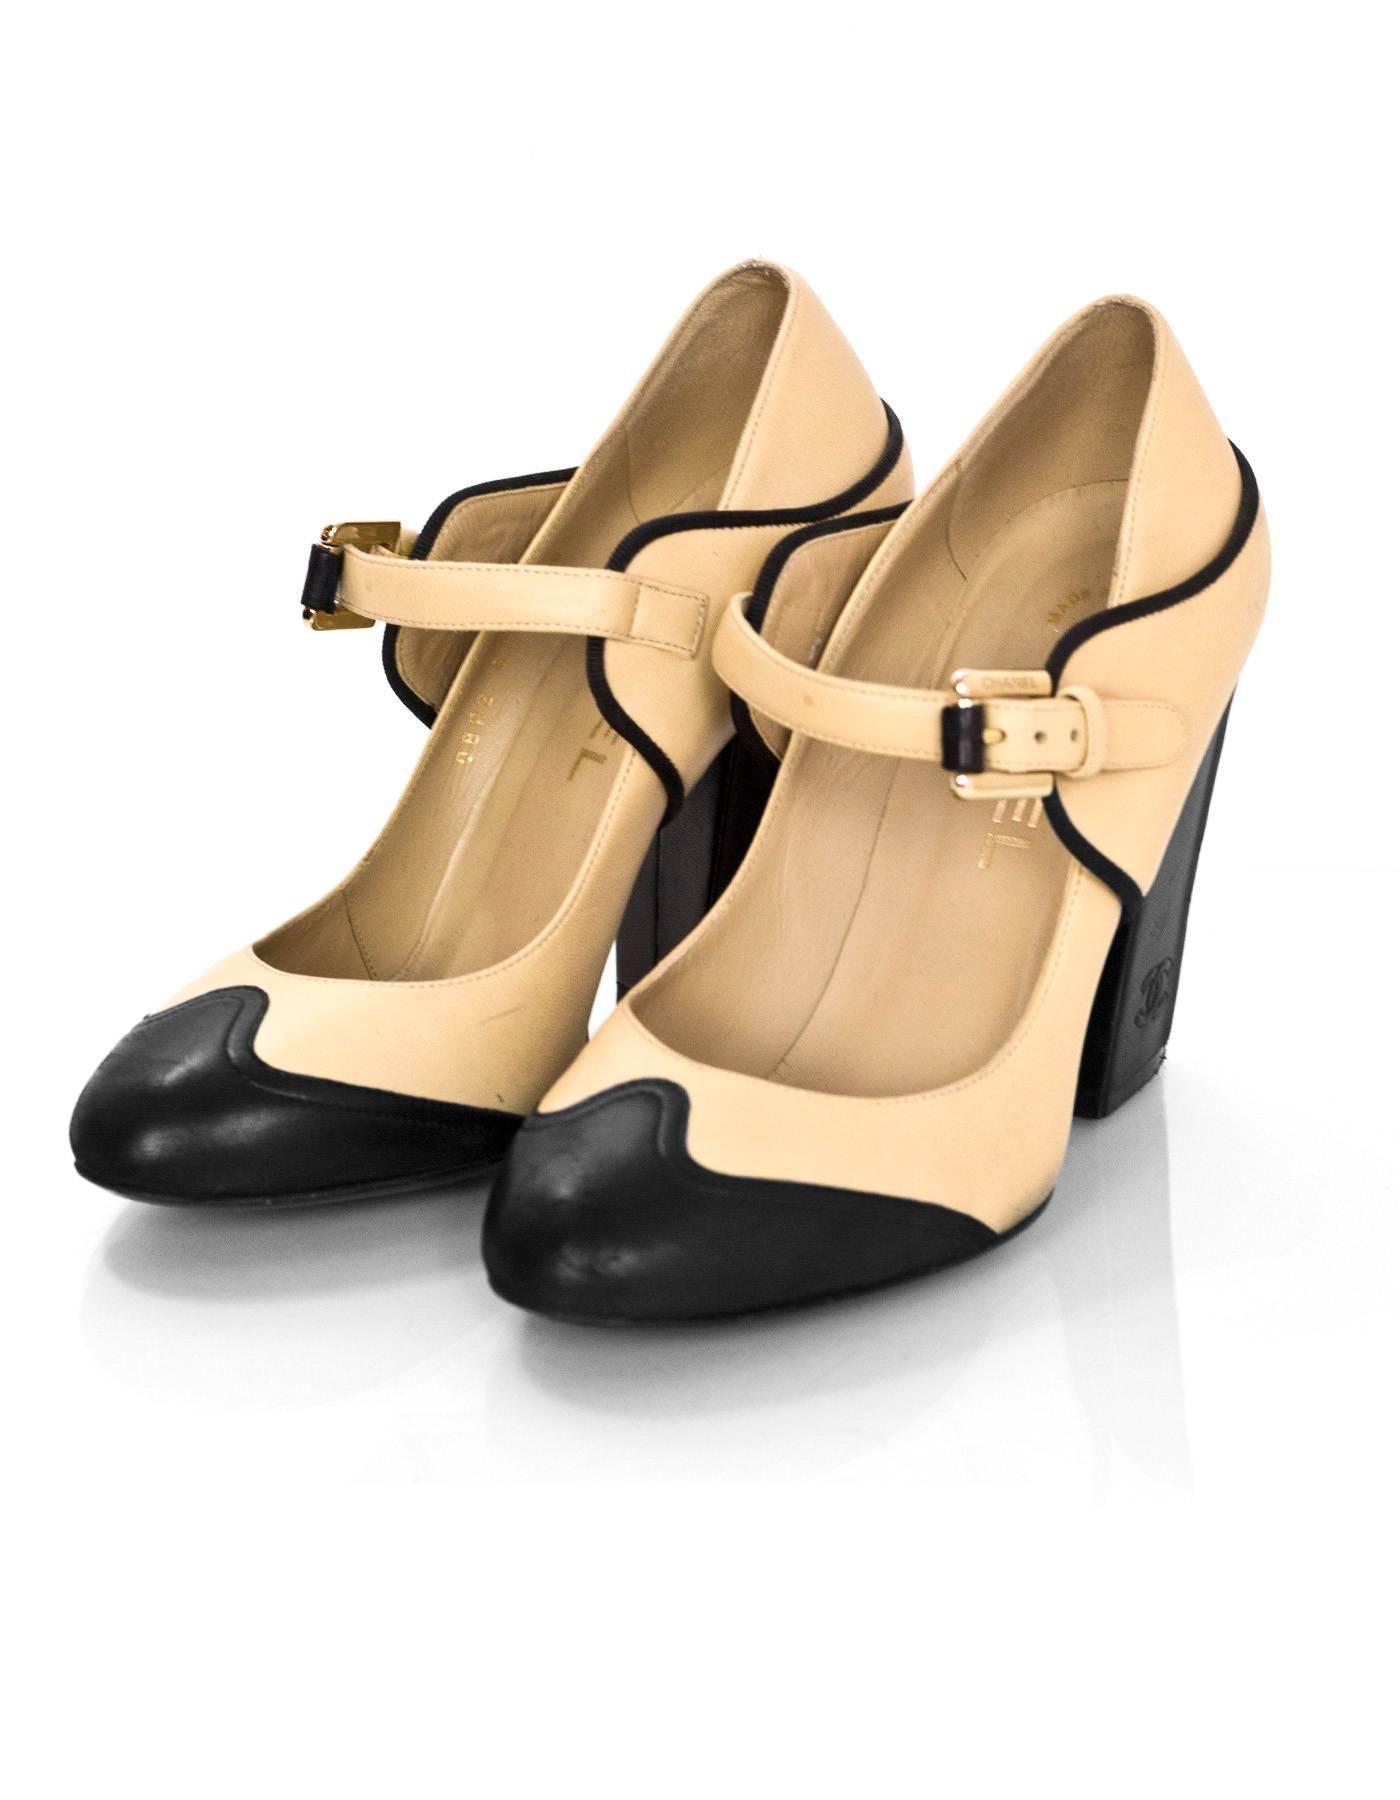 Chanel Beige & Black Leather Mary Jane Pumps Sz 36

Made In: Italy
Color: Beige, black
Materials: Leather
Closure/Opening: Buckle closure across vamp
Sole Stamp: CC Made in Italy 36
Overall Condition: Excellent pre-owned condition with the exception